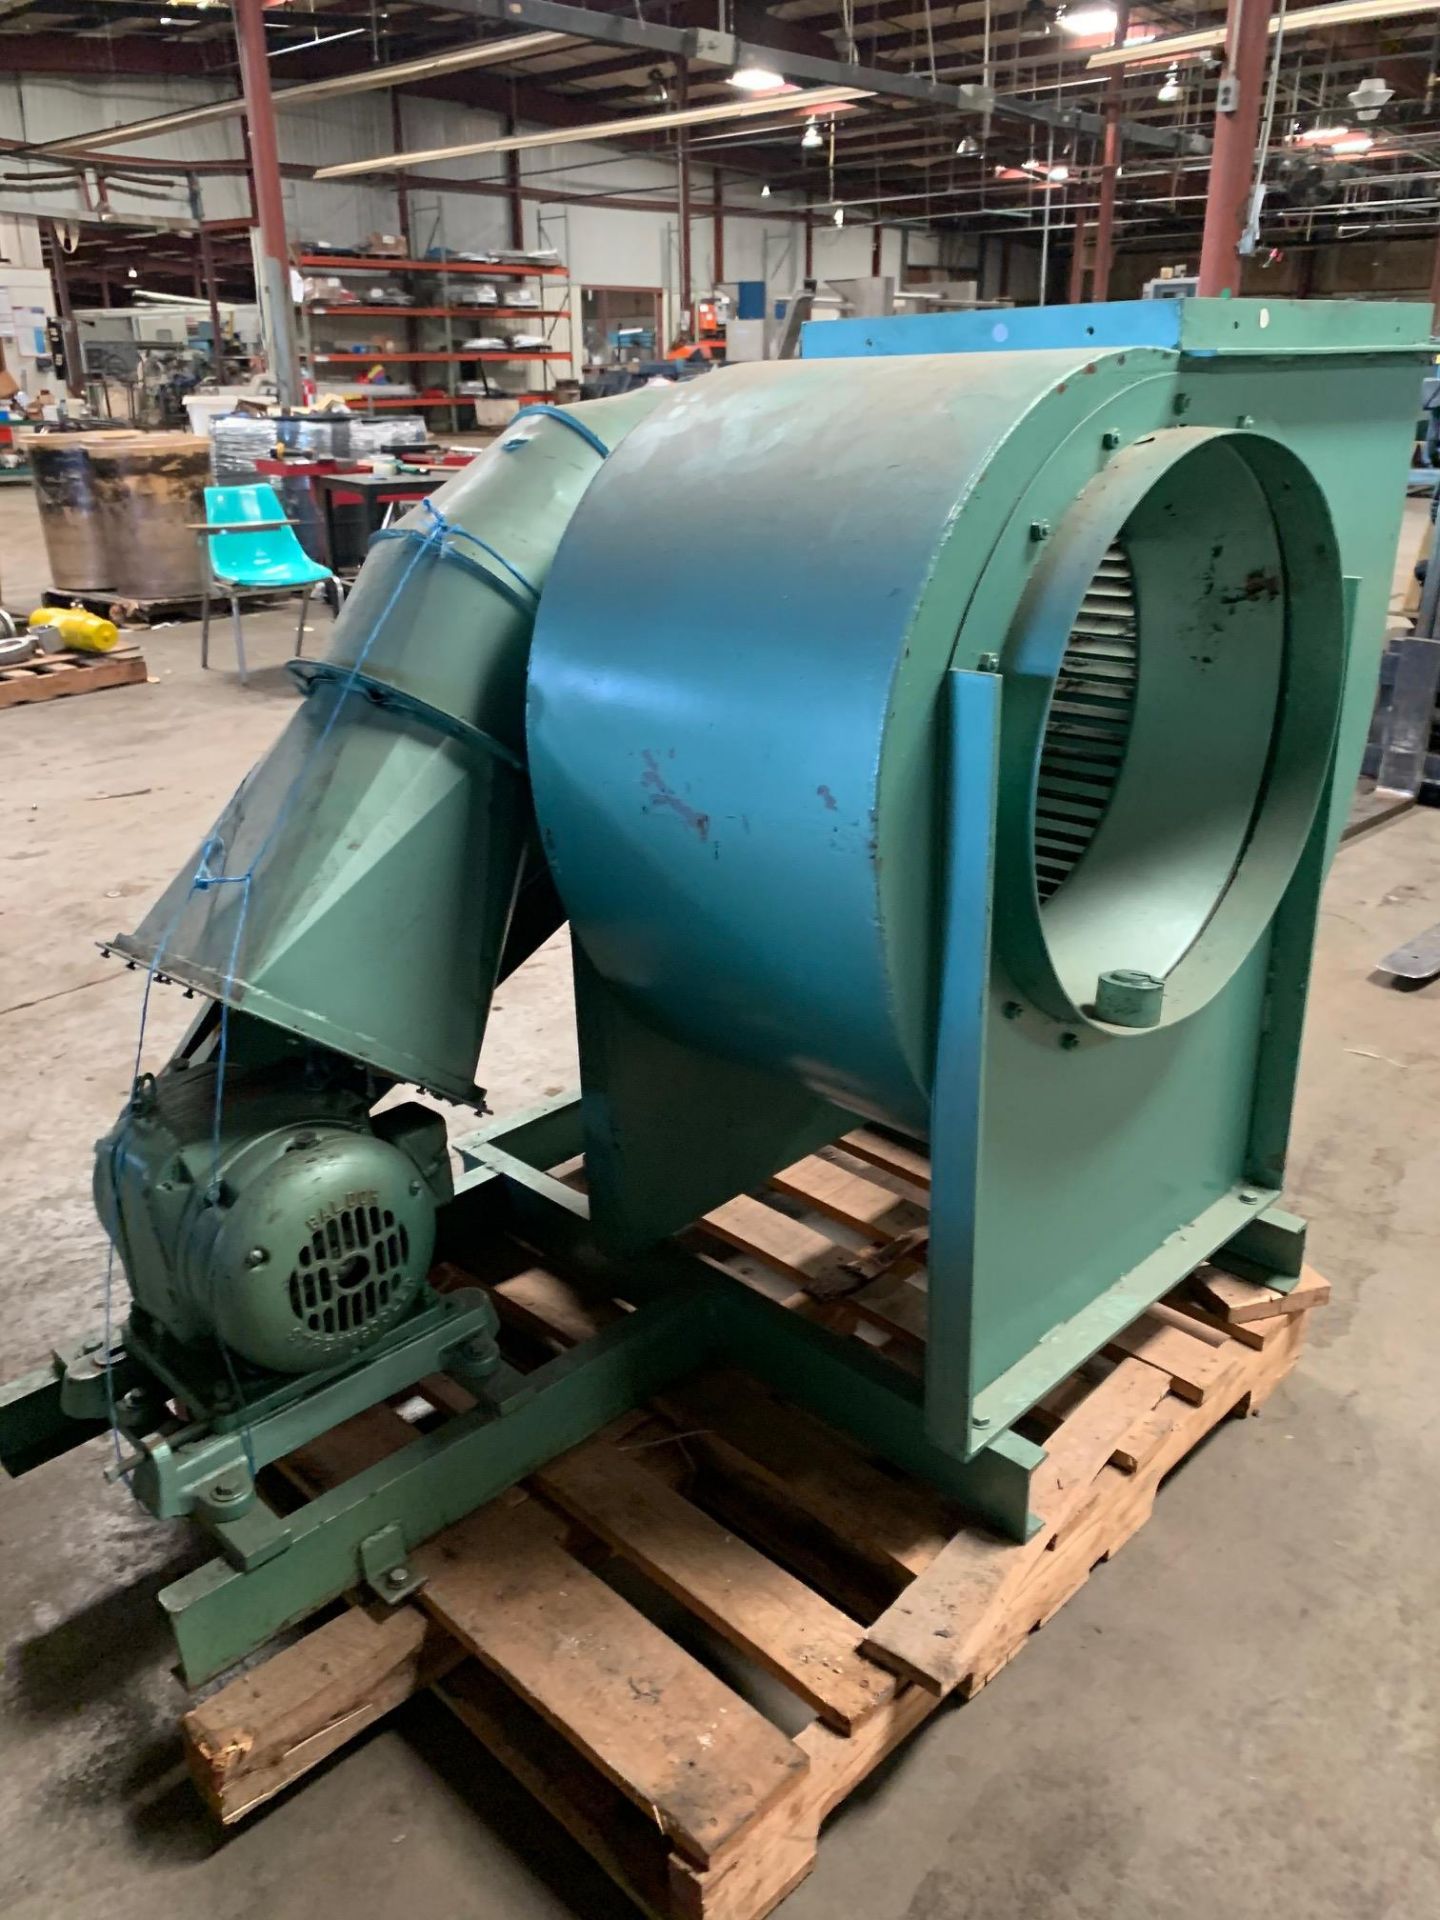 Suction Fans 5HP 220/460 volts 1750 Rpm, Rigging Fee: $25